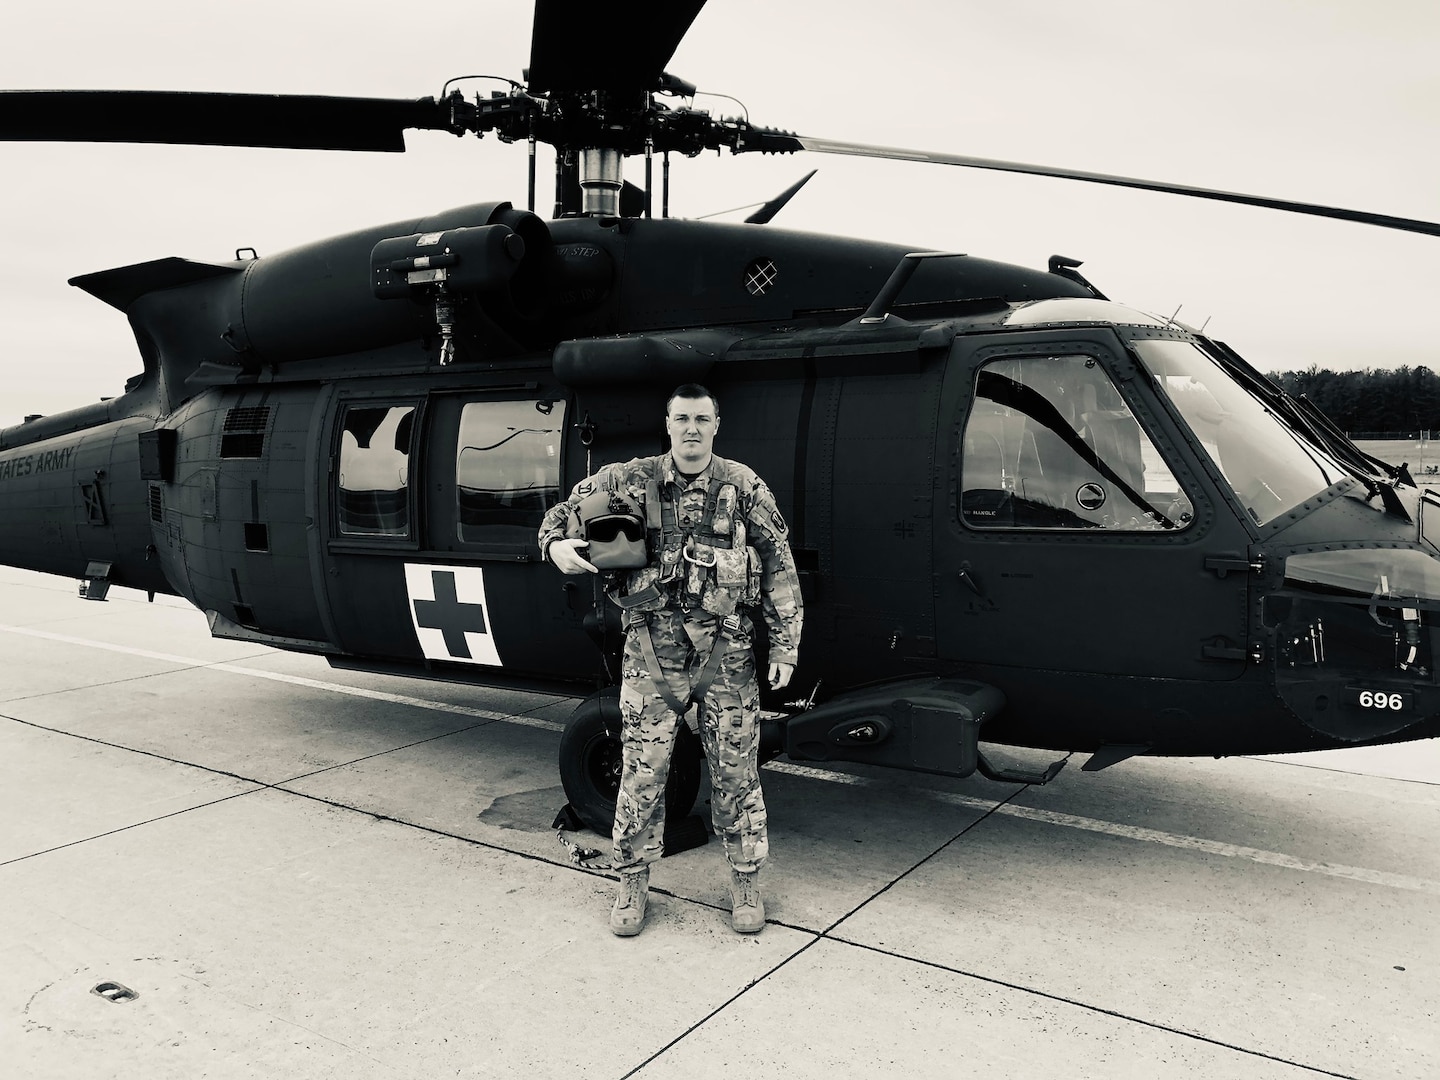 While on his way home from work, Massachusetts National Guard Sgt. 1st Class Charles Wilkinson, a flight paramedic with Detachment 1, Charlie Company, 3rd of the 126th Aviation, Westfield, Mass., came to the aid of a man struck by a car. After multiple surgeries, the man is doing well.